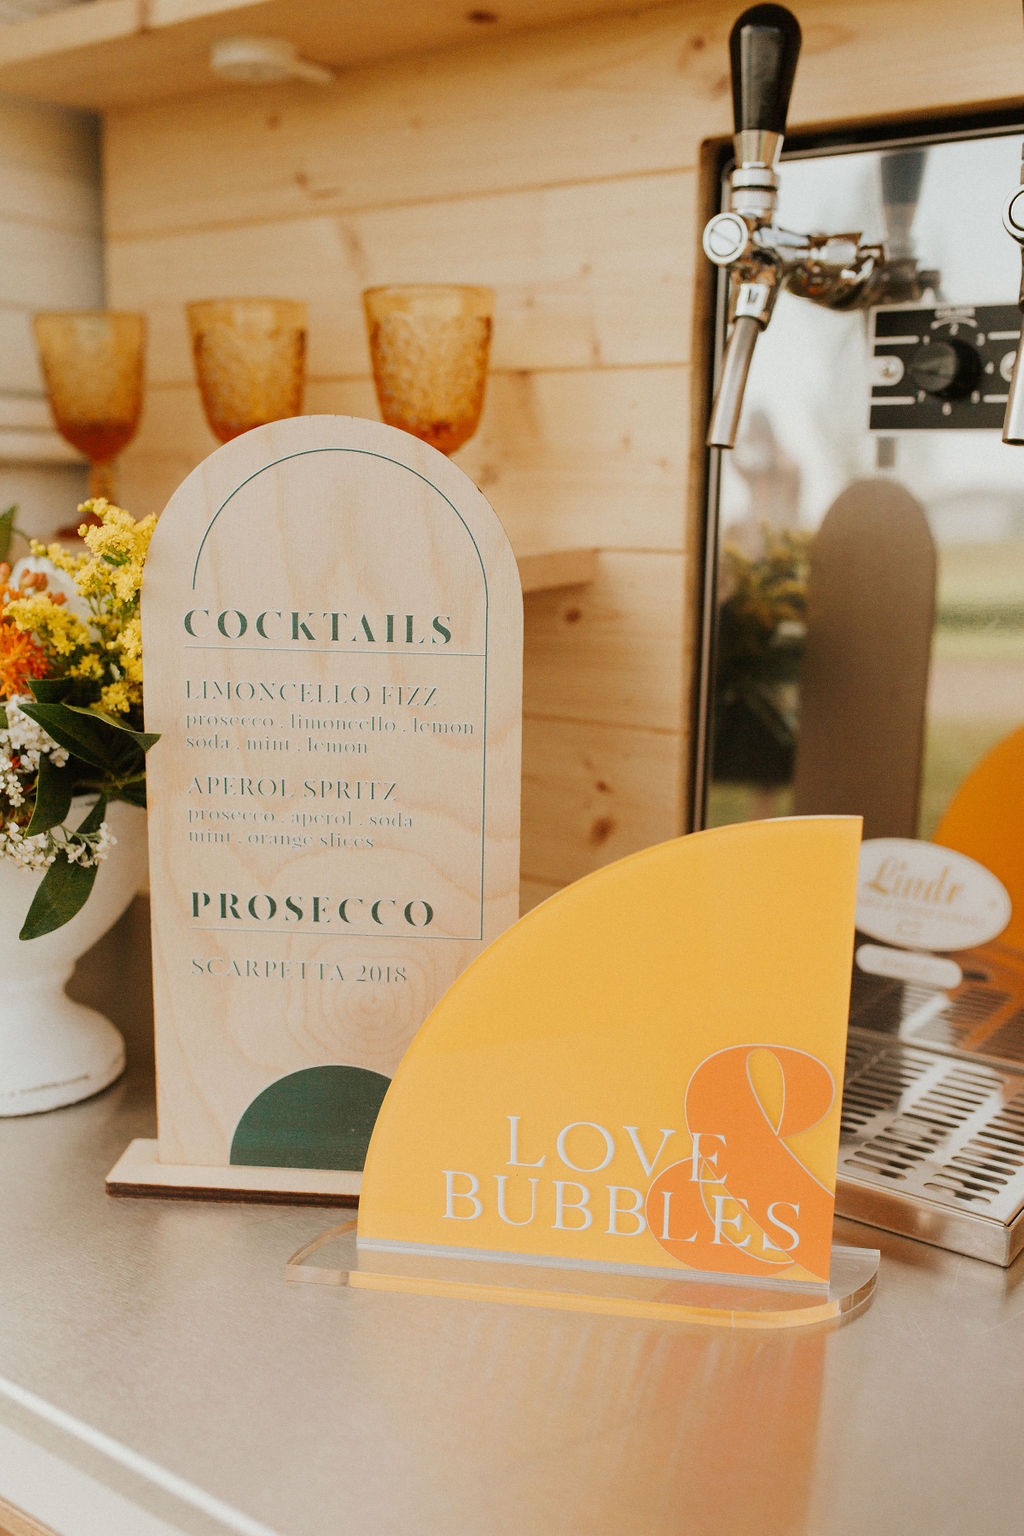 Tangerine inspired cocktail signs on the Prosecco mobile bar cart for a styled shoot